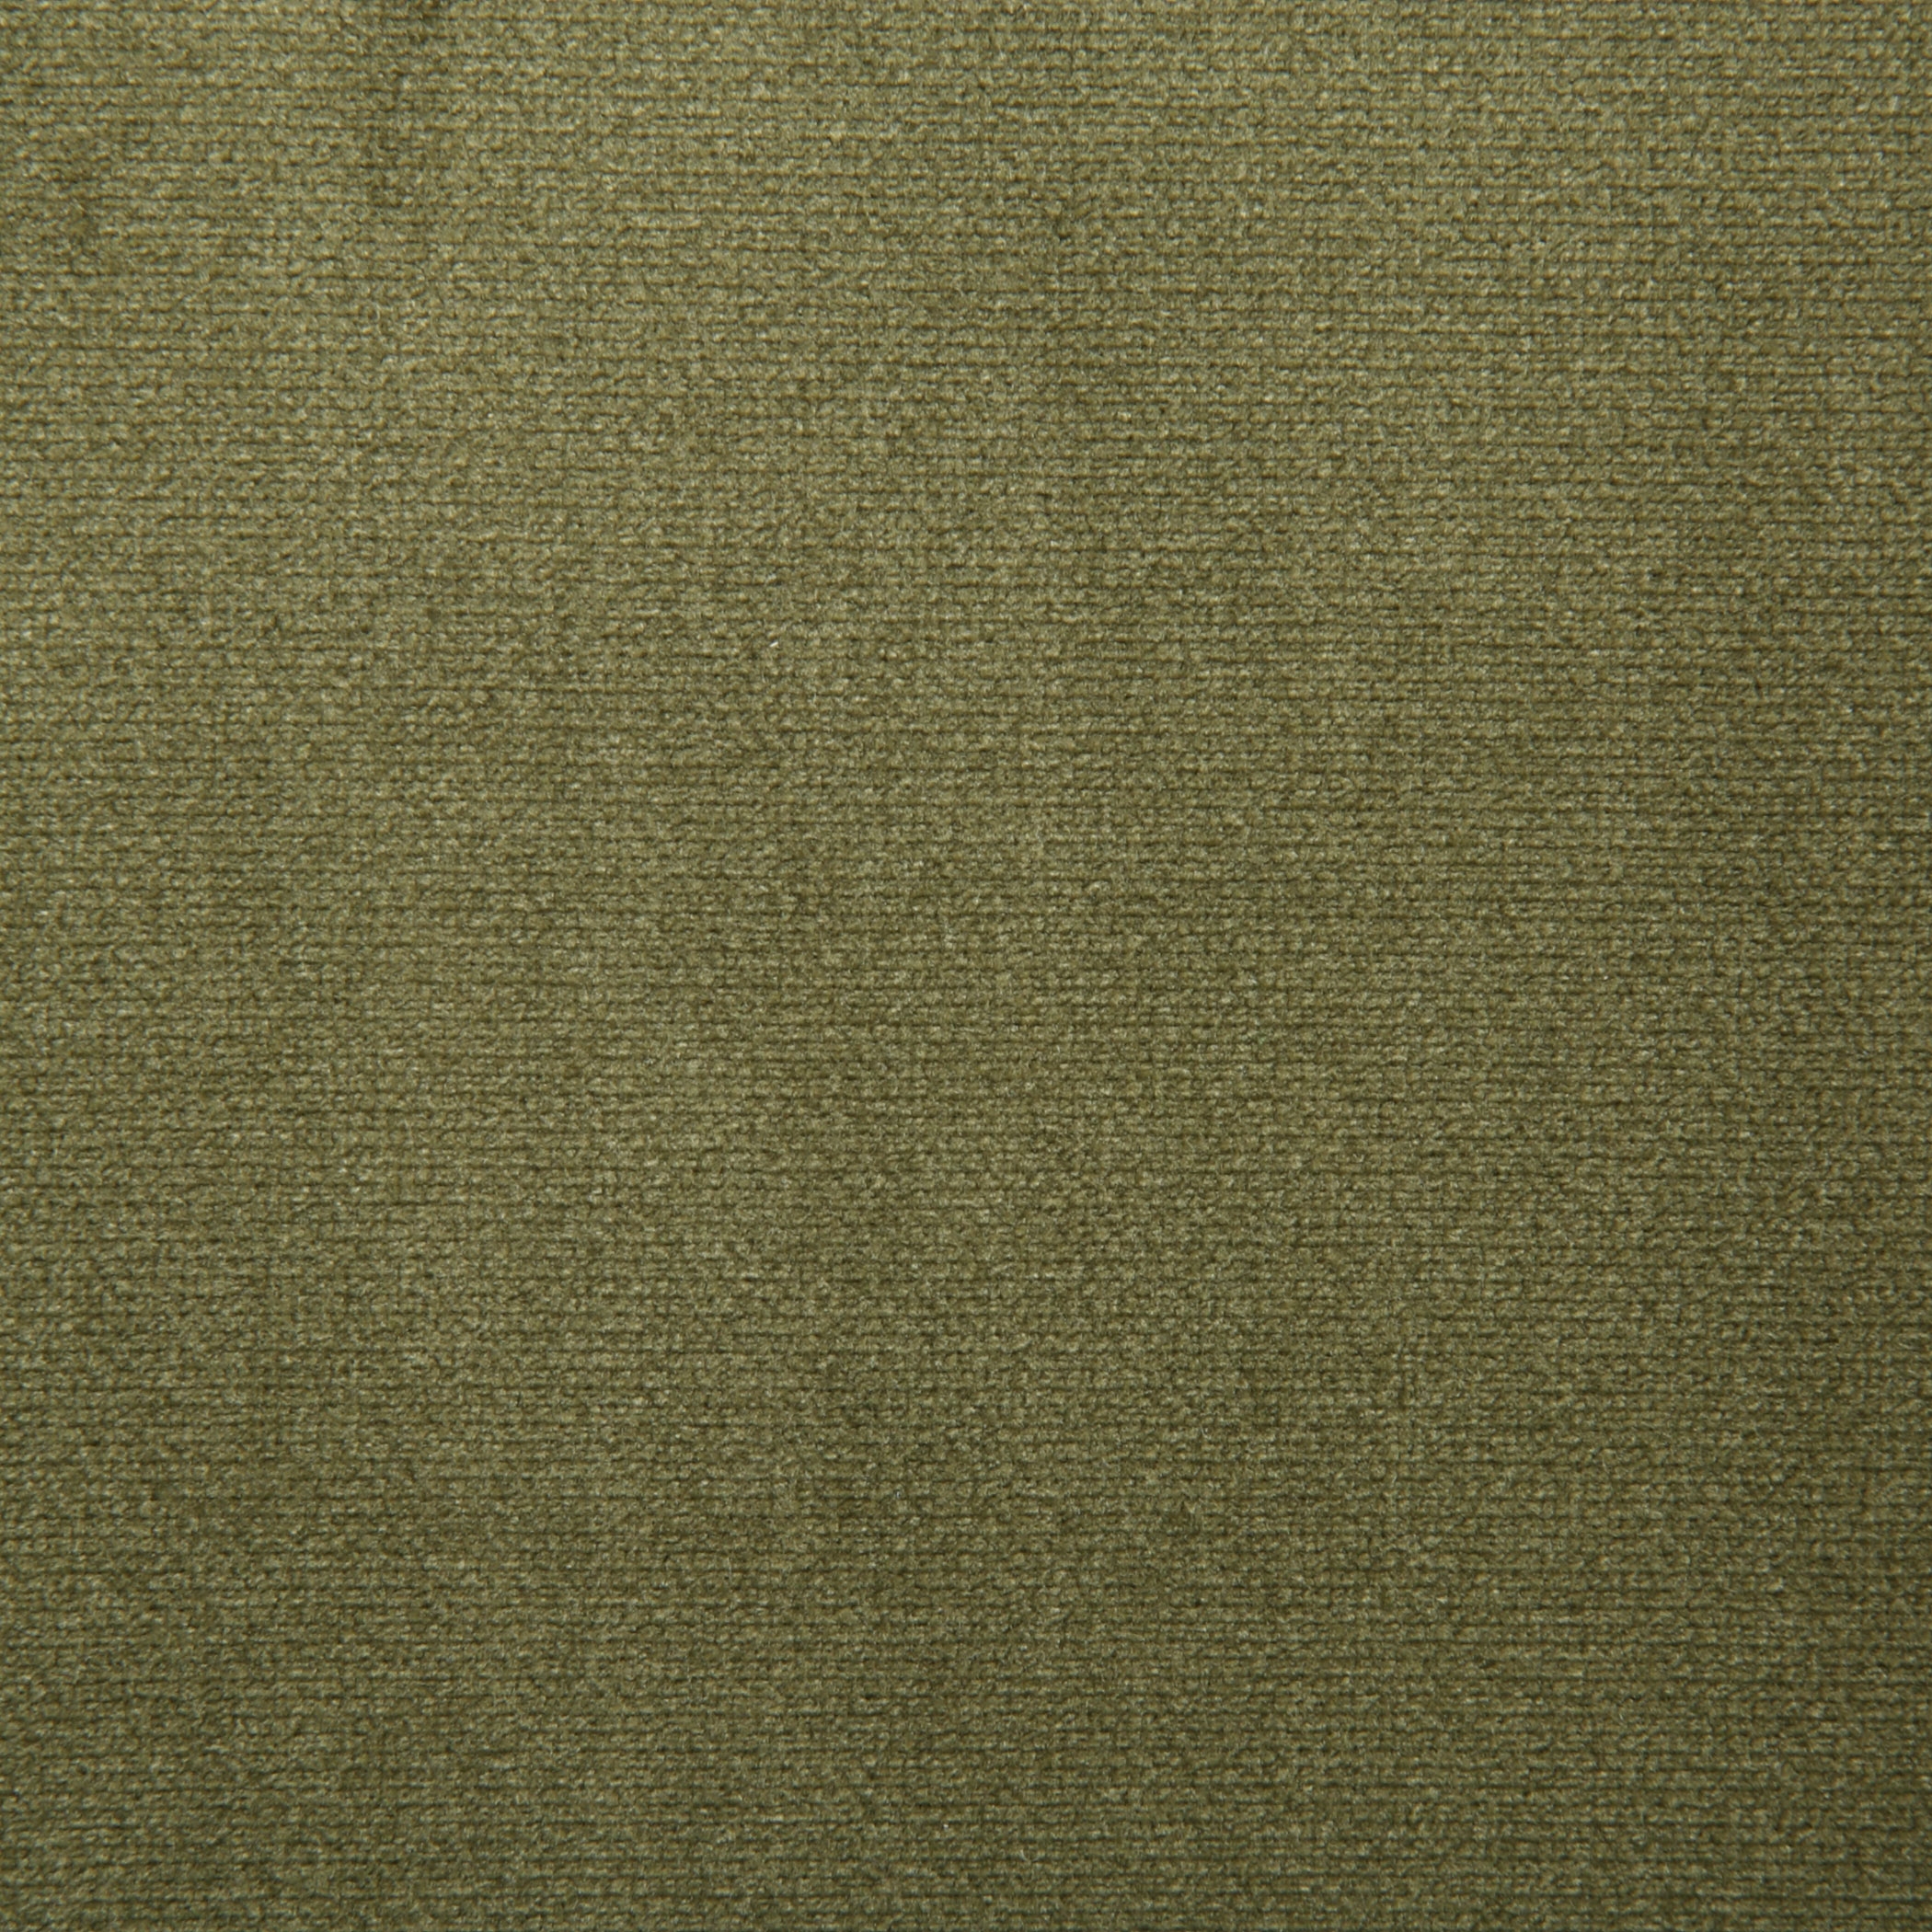 Conroy Accent Chair, Olive - Image 5